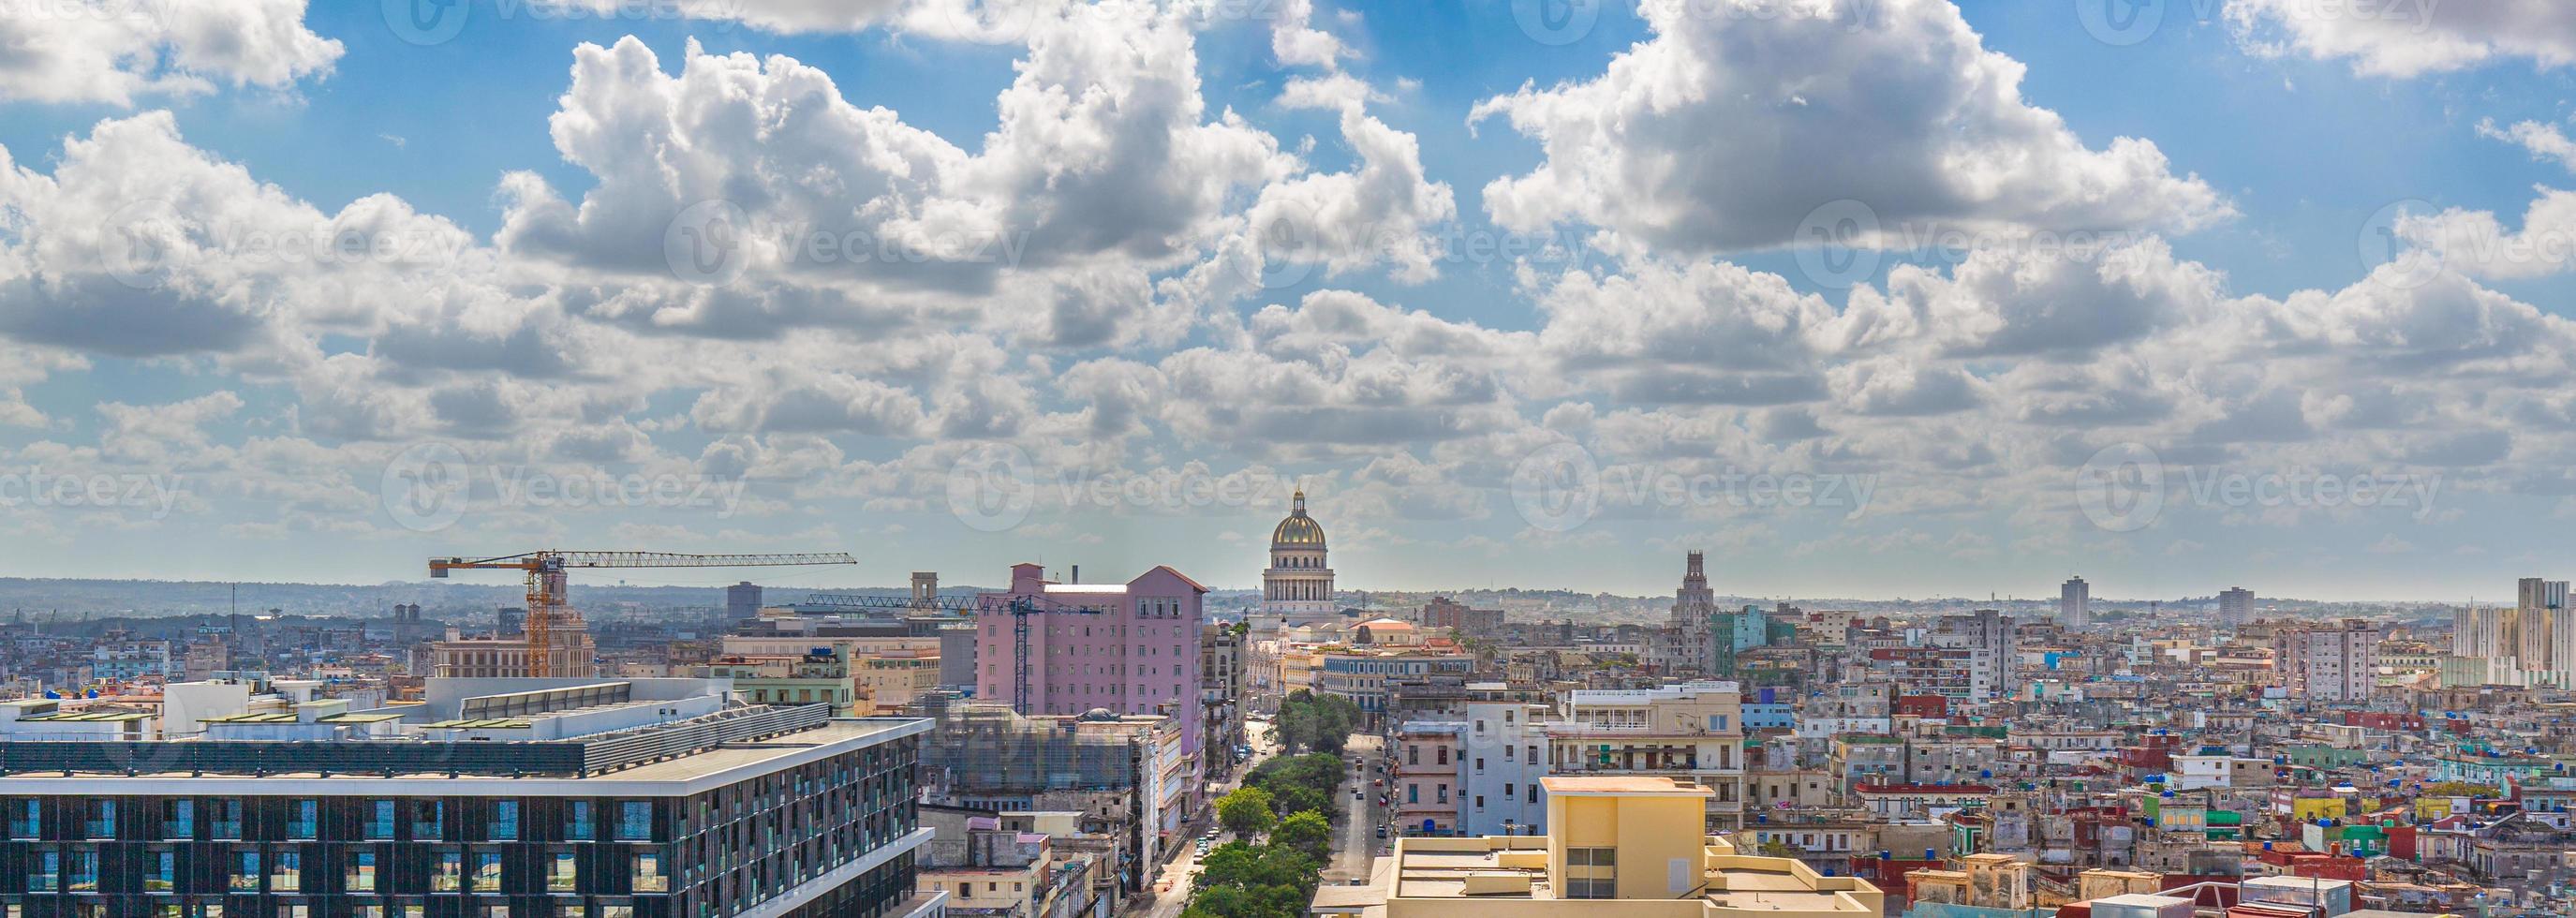 Panoramic view of an Old Havana and colorful Old Havana streets in historic city center Havana Vieja near Paseo El Prado and Capitolio photo